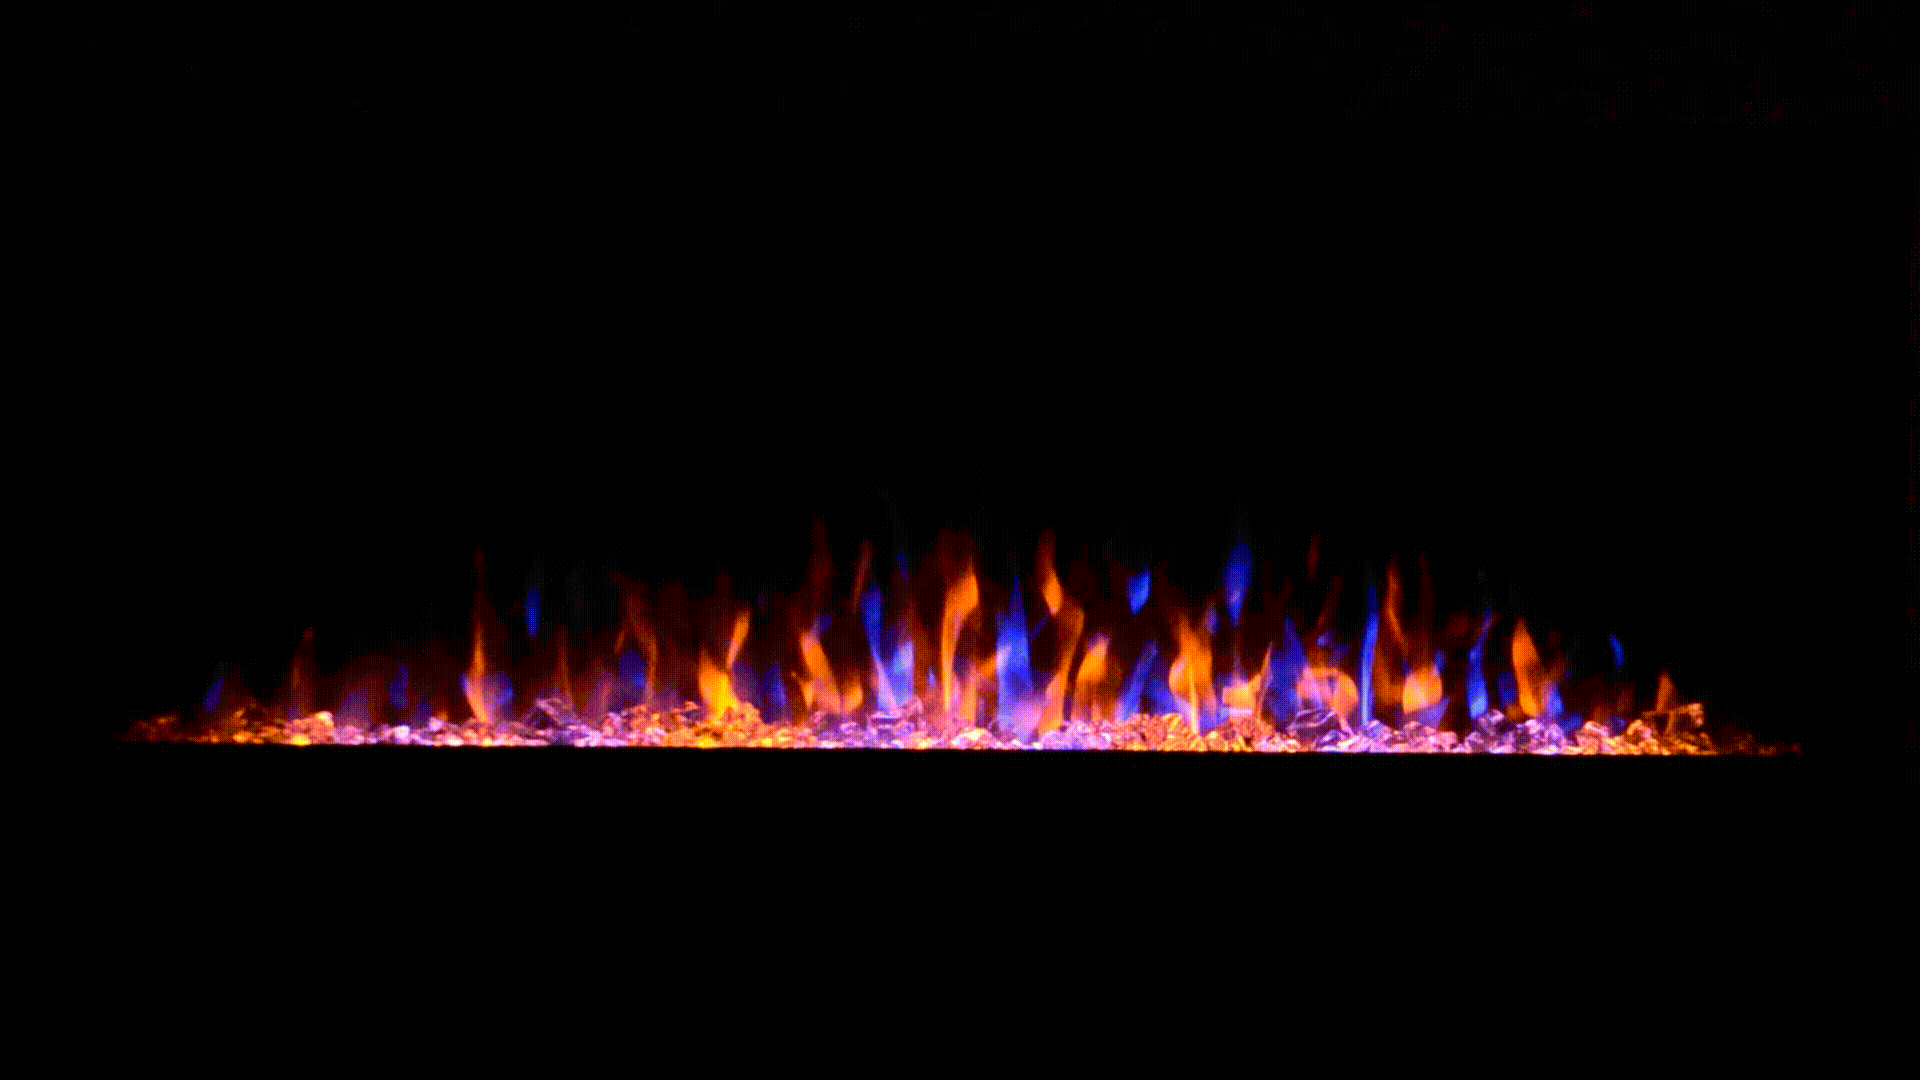 Sideline 72 80015 72 inch Recessed Electric Fireplace gif of flames with crystals.